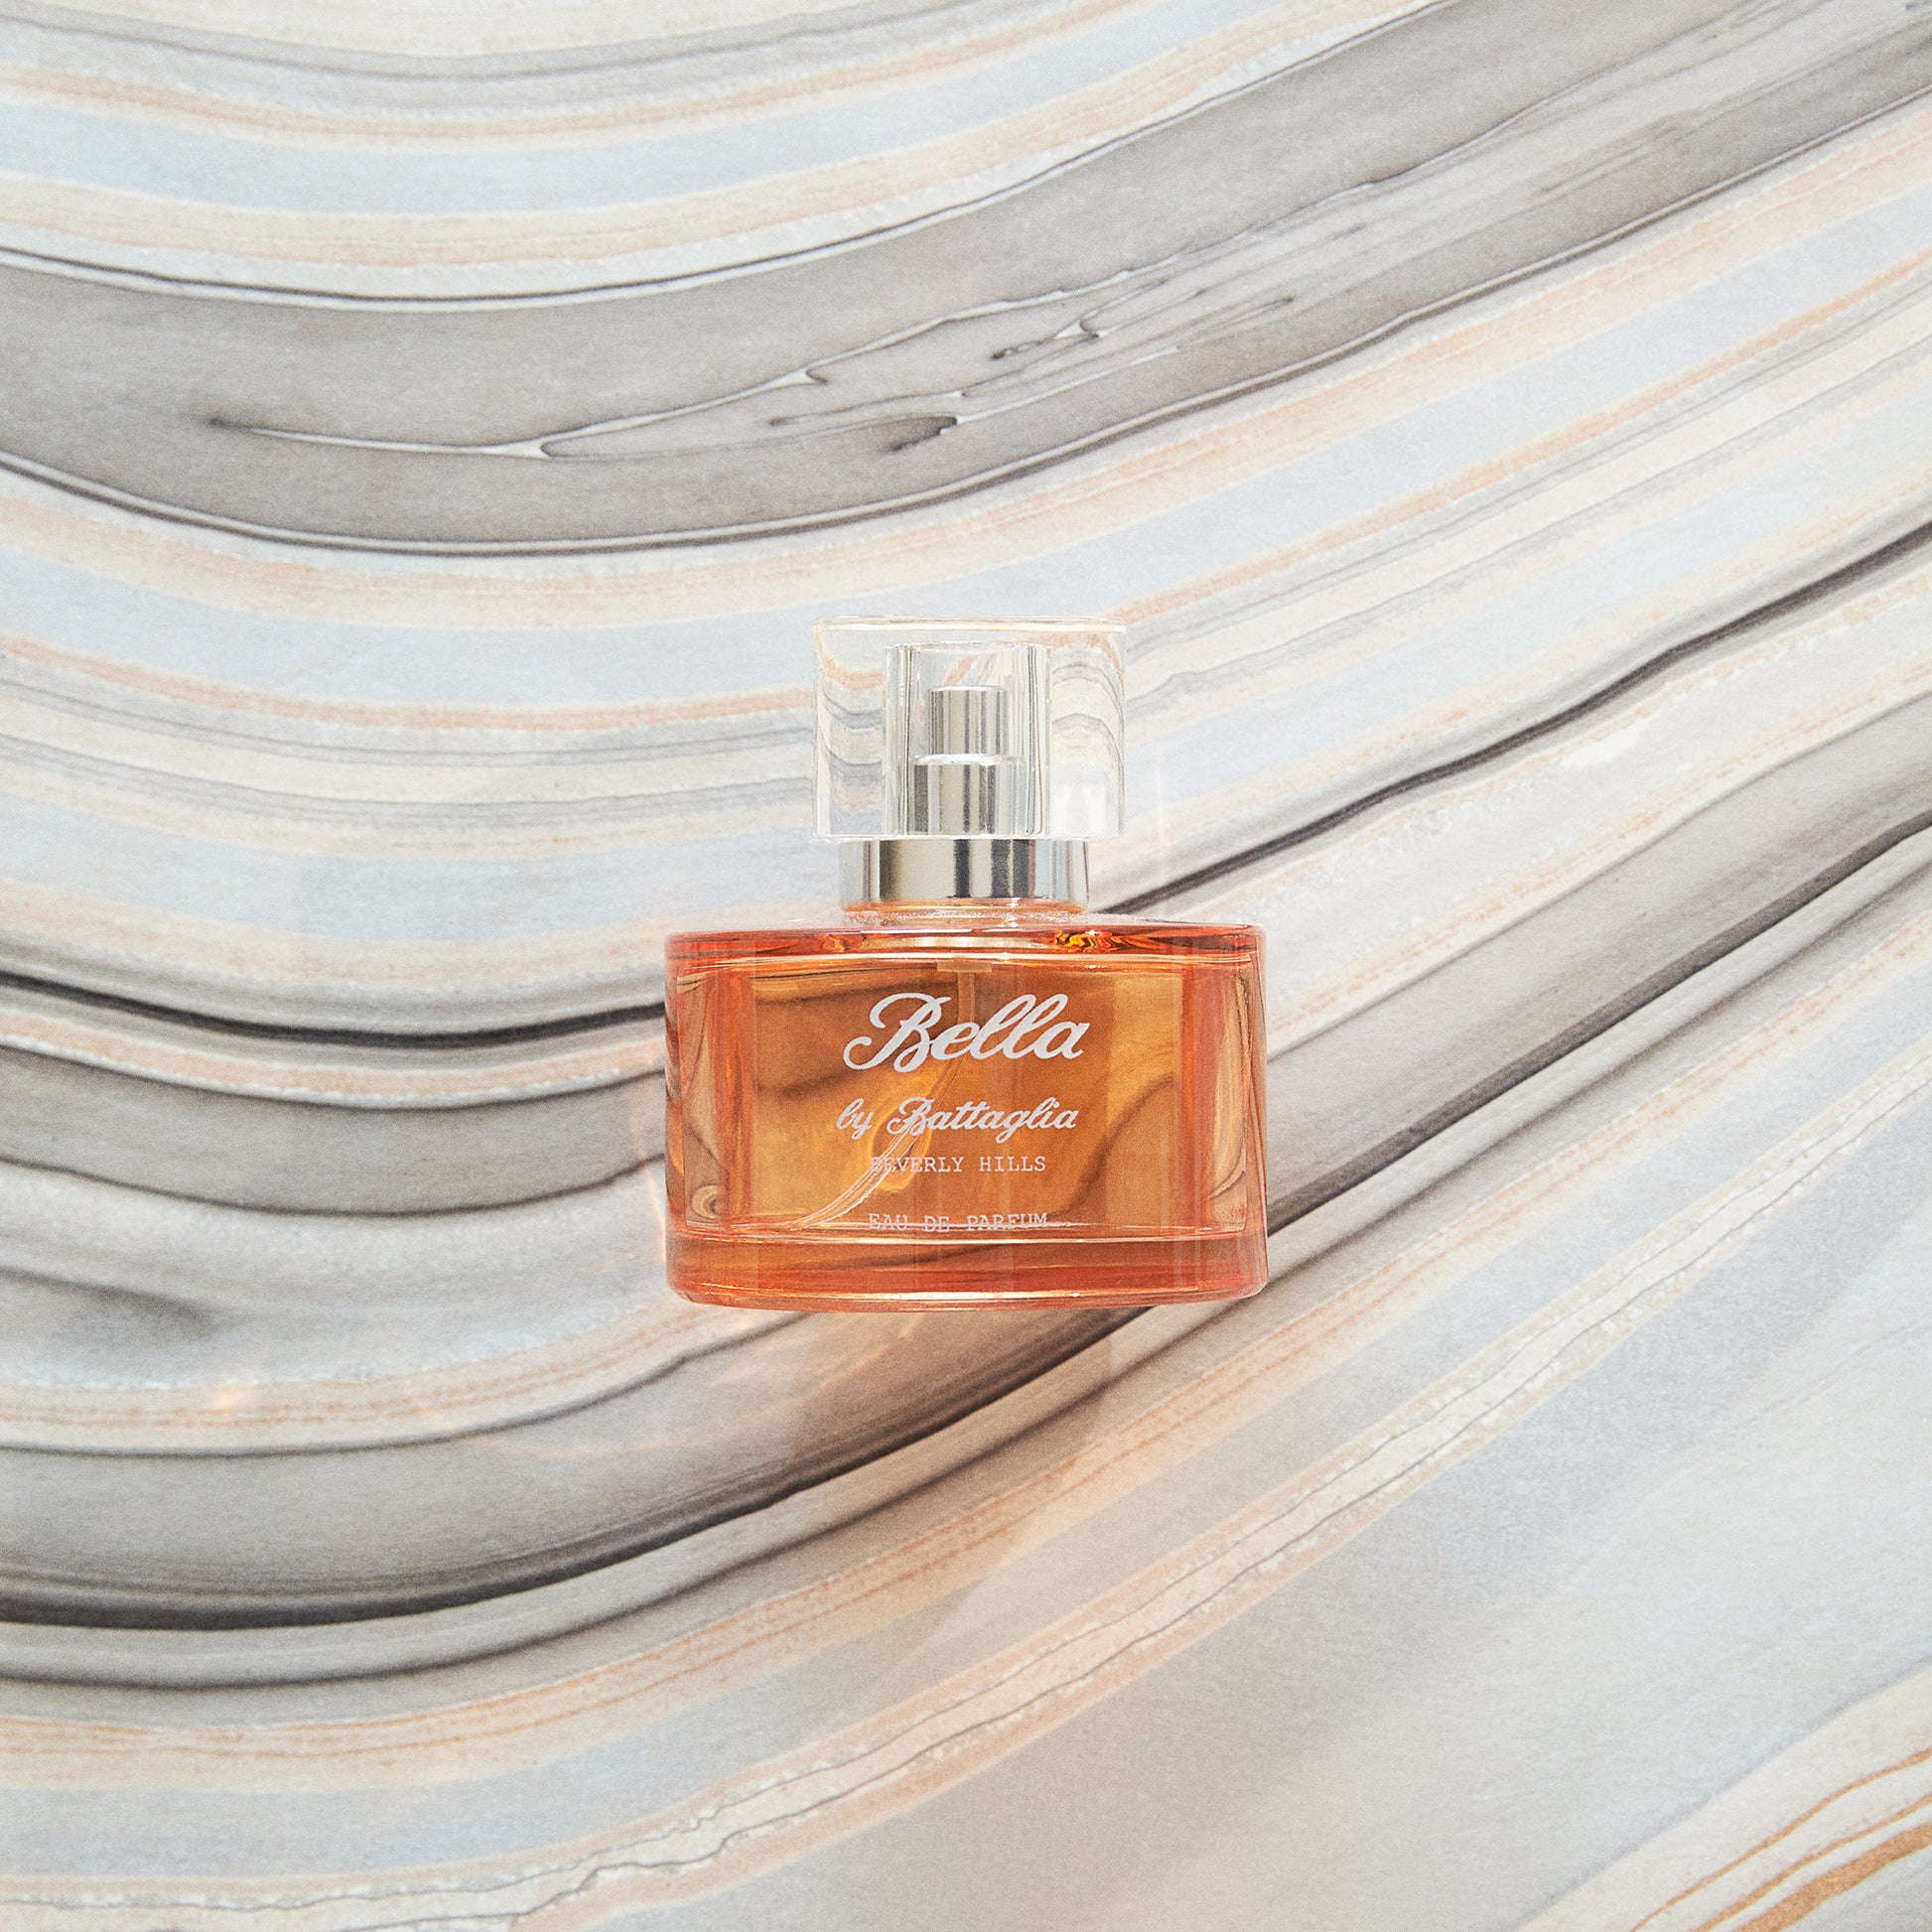 A photo of the Bella fragrance by Battaglia against a grey marbled paper background. The fragrance bottle is round and orange with a clear square top.  